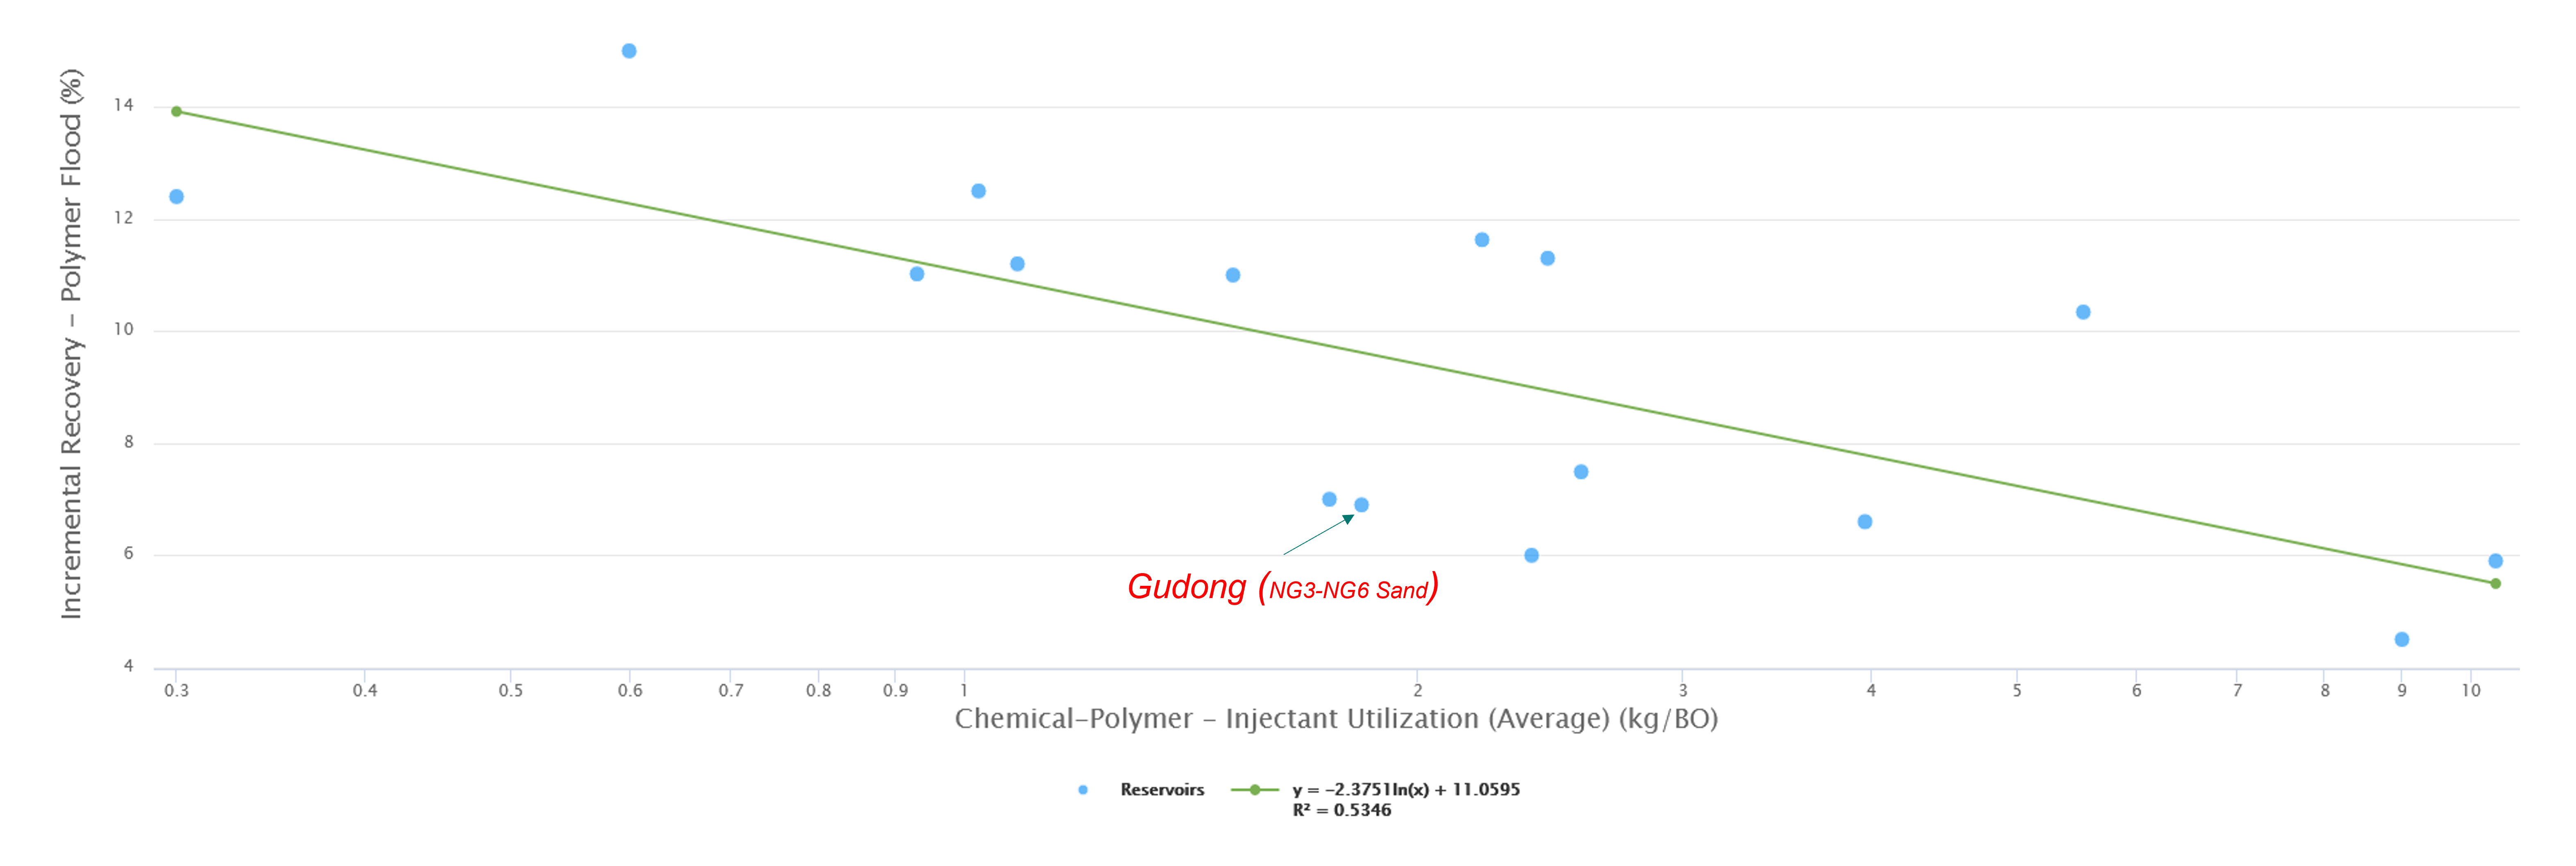 Fig. 7 – Establishing incremental recovery trend line for Gudong NG3-NG6 reservoir against 16 applicable global analogues.